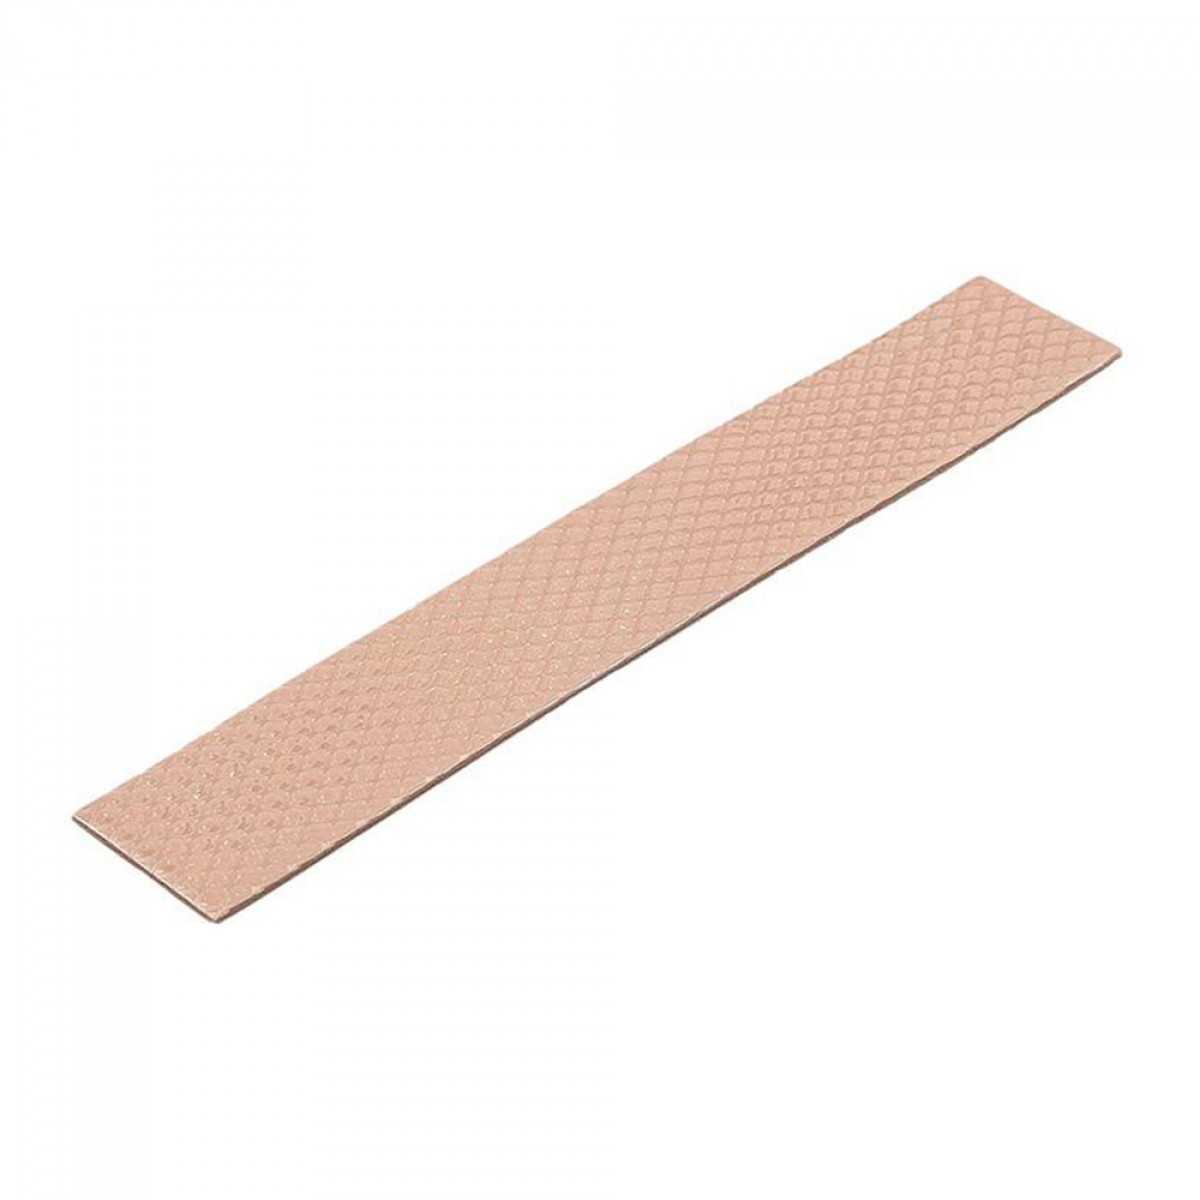 Thermal Pad Thermal Grizzly Minus Pad 8, 120 x 20 x 1.5mm, TG-MP8-120-20-15-1R